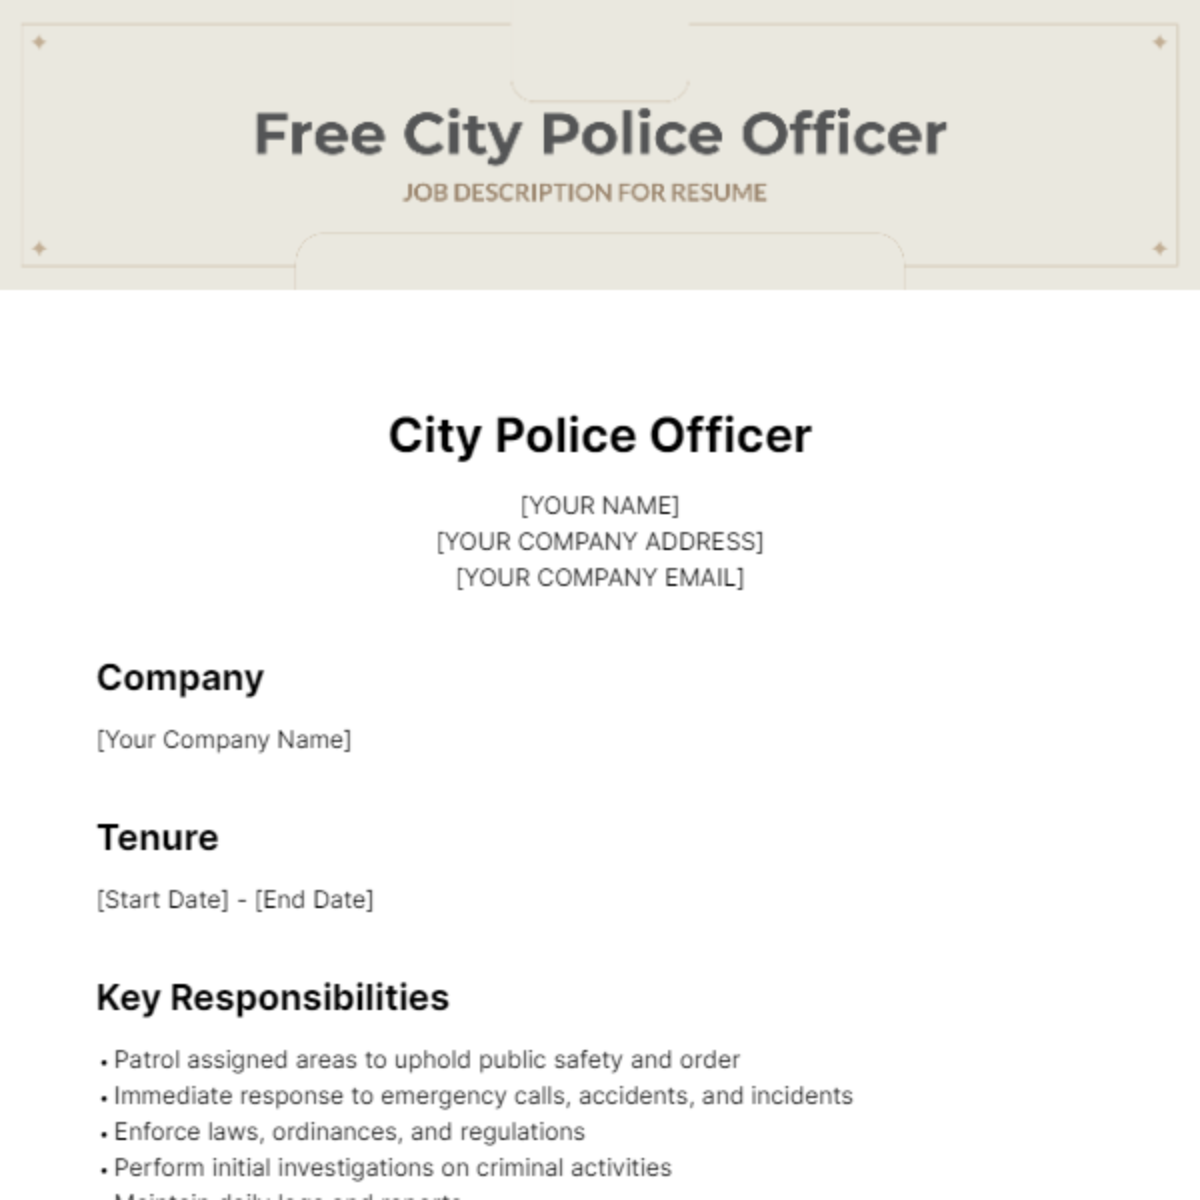 City Police Officer Job Description with Resume Template